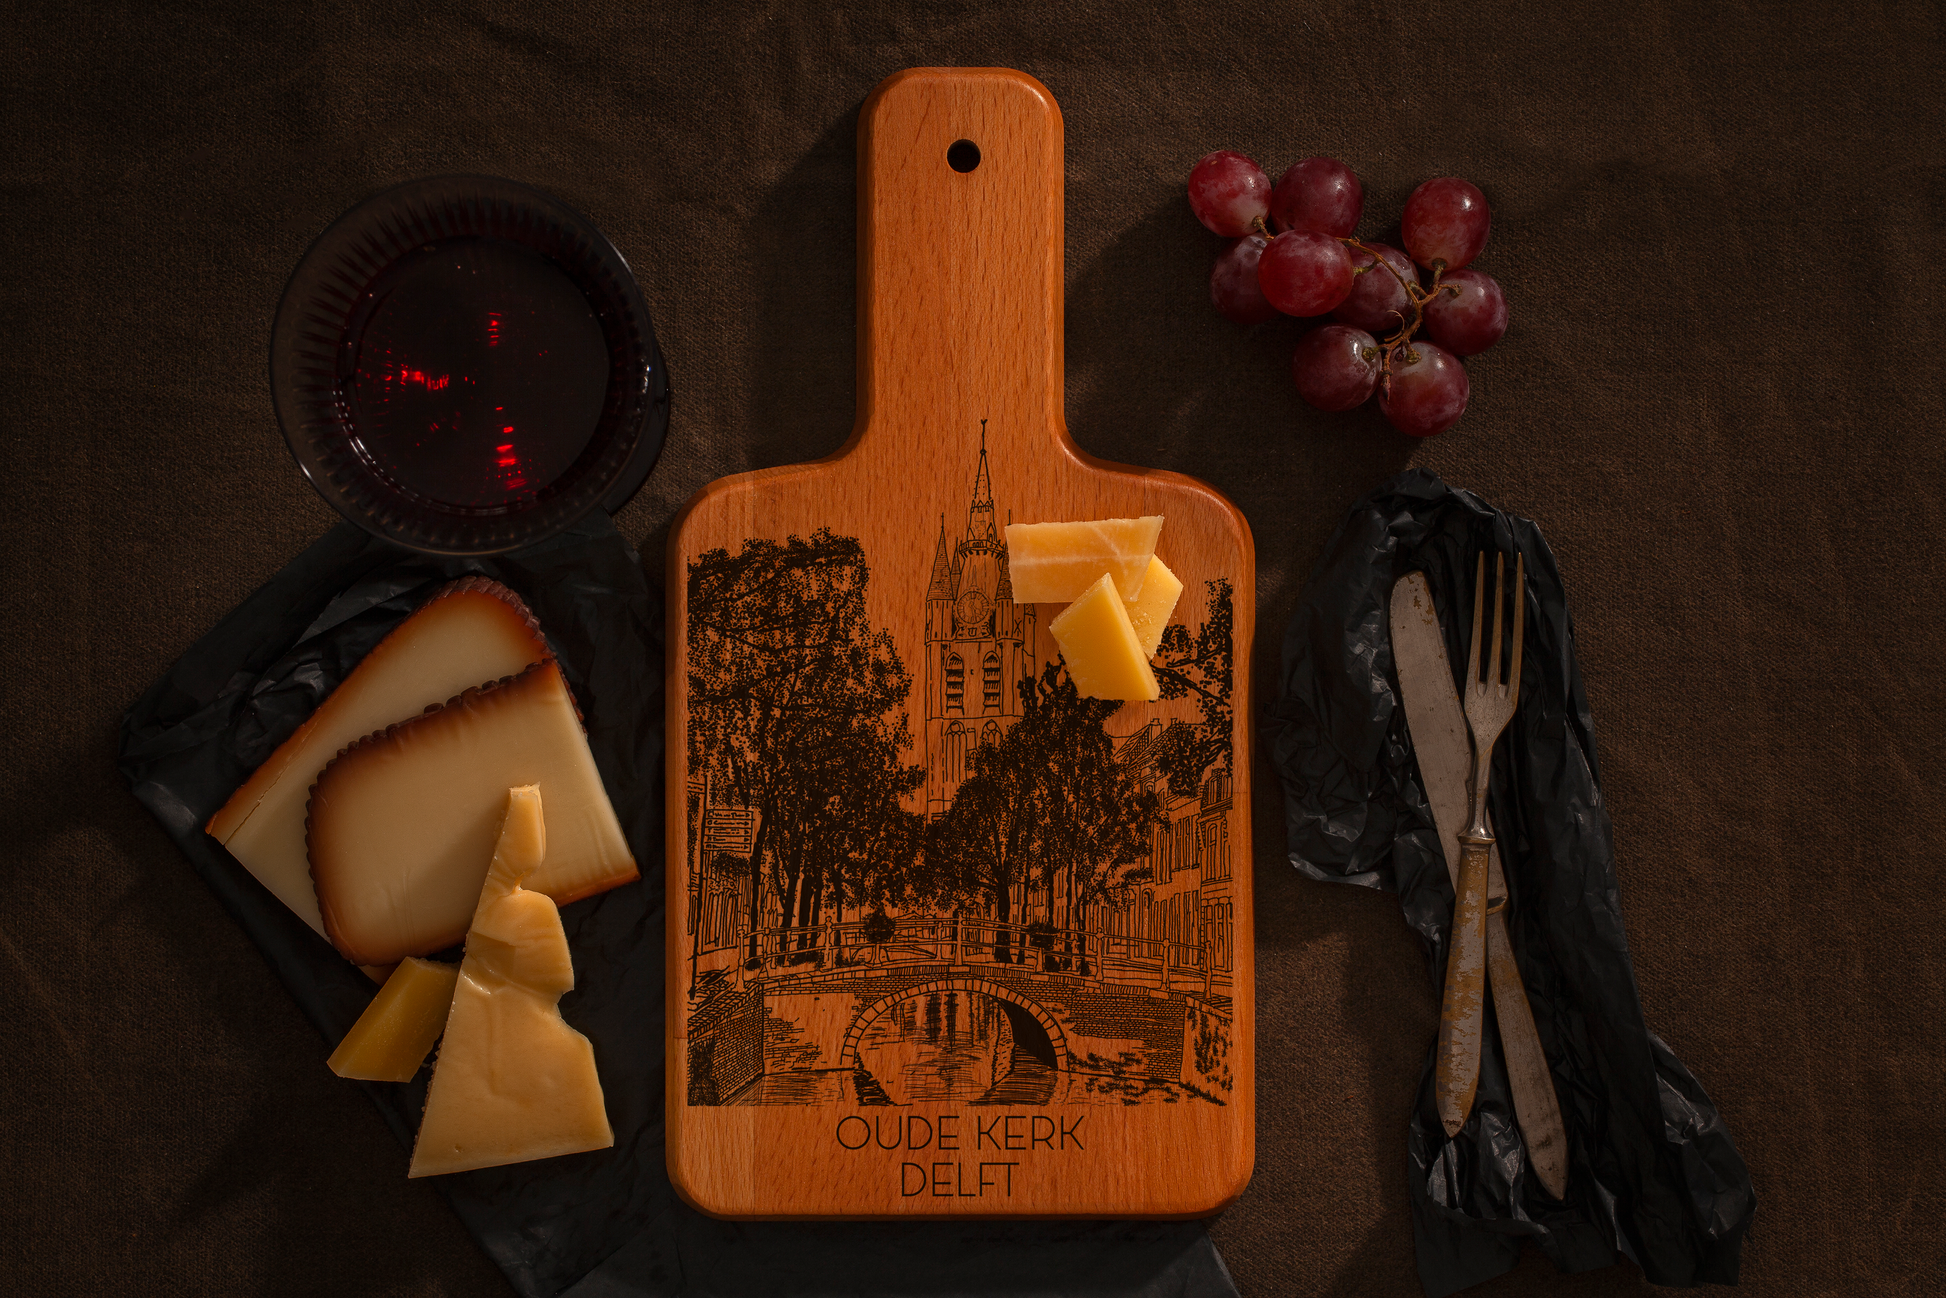 Delft, Oude Kerk, cheese board, front